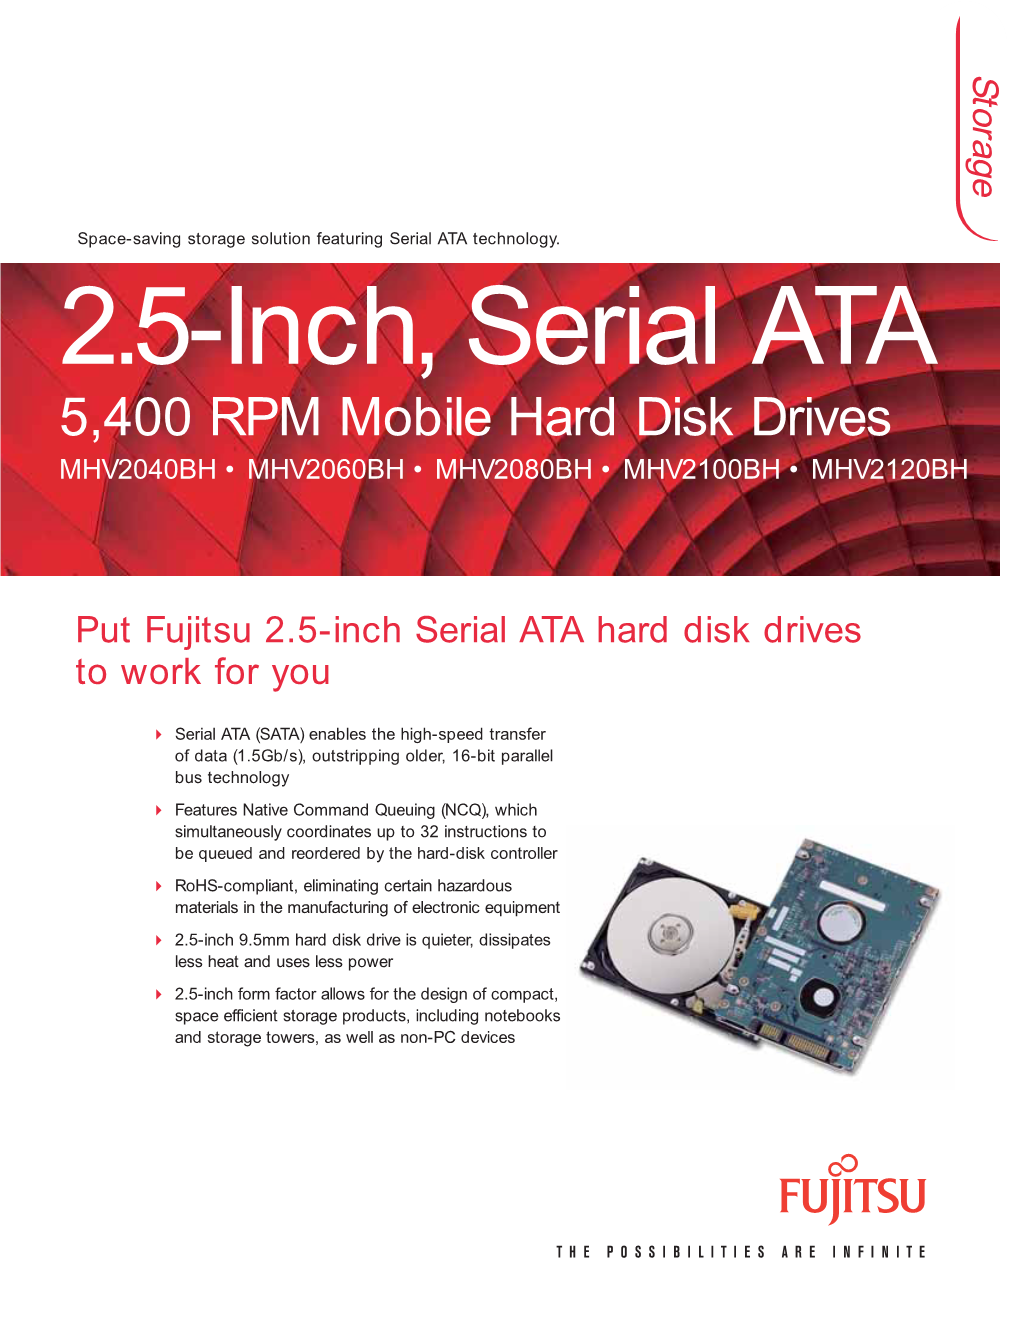 2.5-Inch, Serial ATA 5,400 RPM Mobile Hard Disk Drives MHV2040BH • MHV2060BH • MHV2080BH • MHV2100BH • MHV2120BH